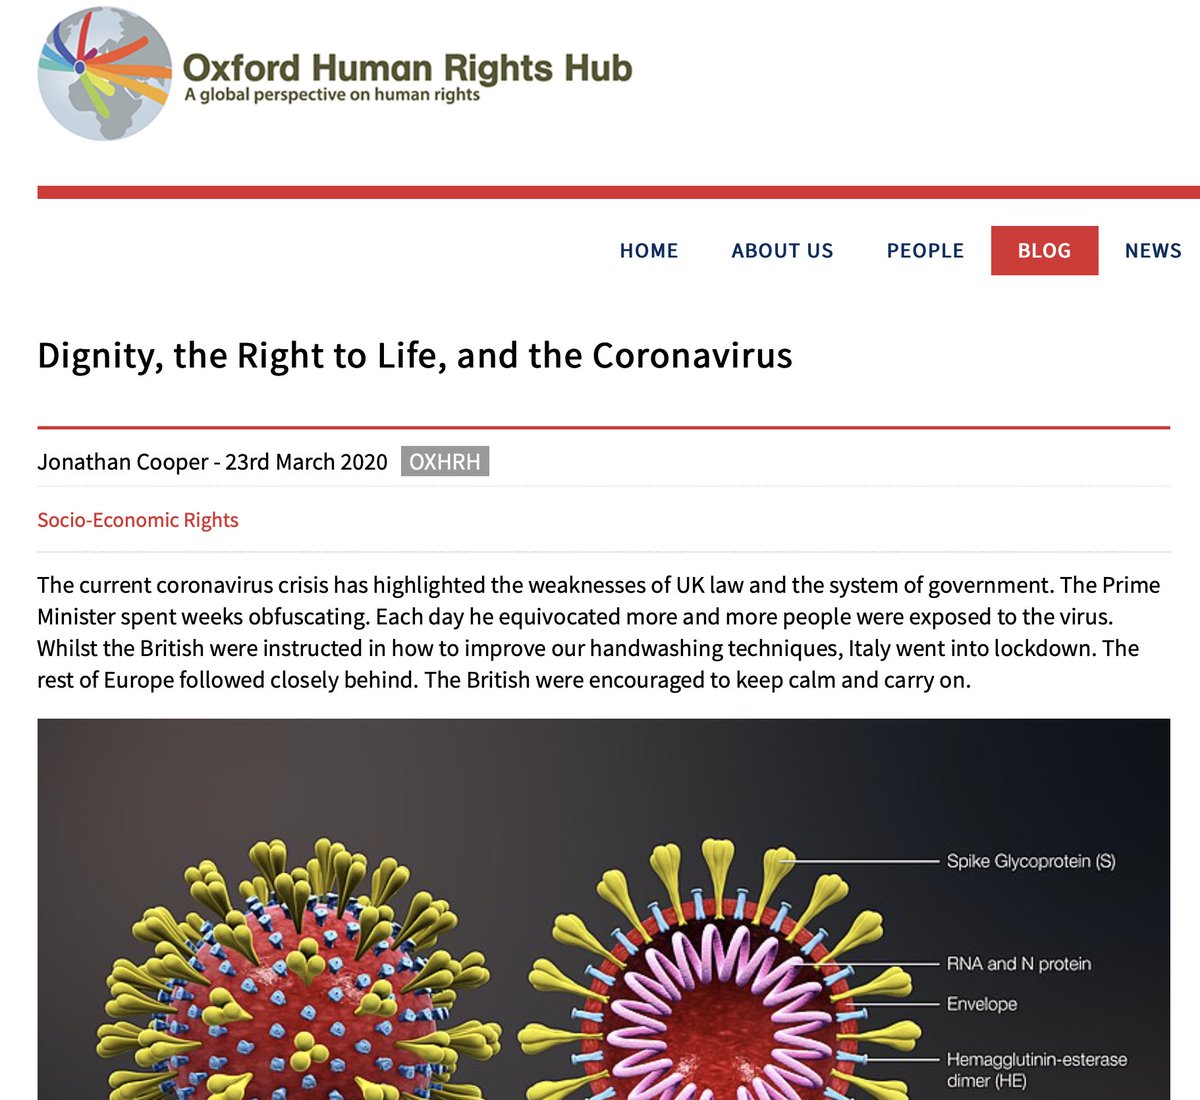 6. On the utilitarian logic that has informed the Government's response to the  #COVID19 crisis,  @JonathanCoopr's recent work is a must-read, eg via  @OxHRH:  http://ohrh.law.ox.ac.uk/dignity-the-right-to-life-and-the-coronavirus/ @DoughtyStPublic  #coronavirus